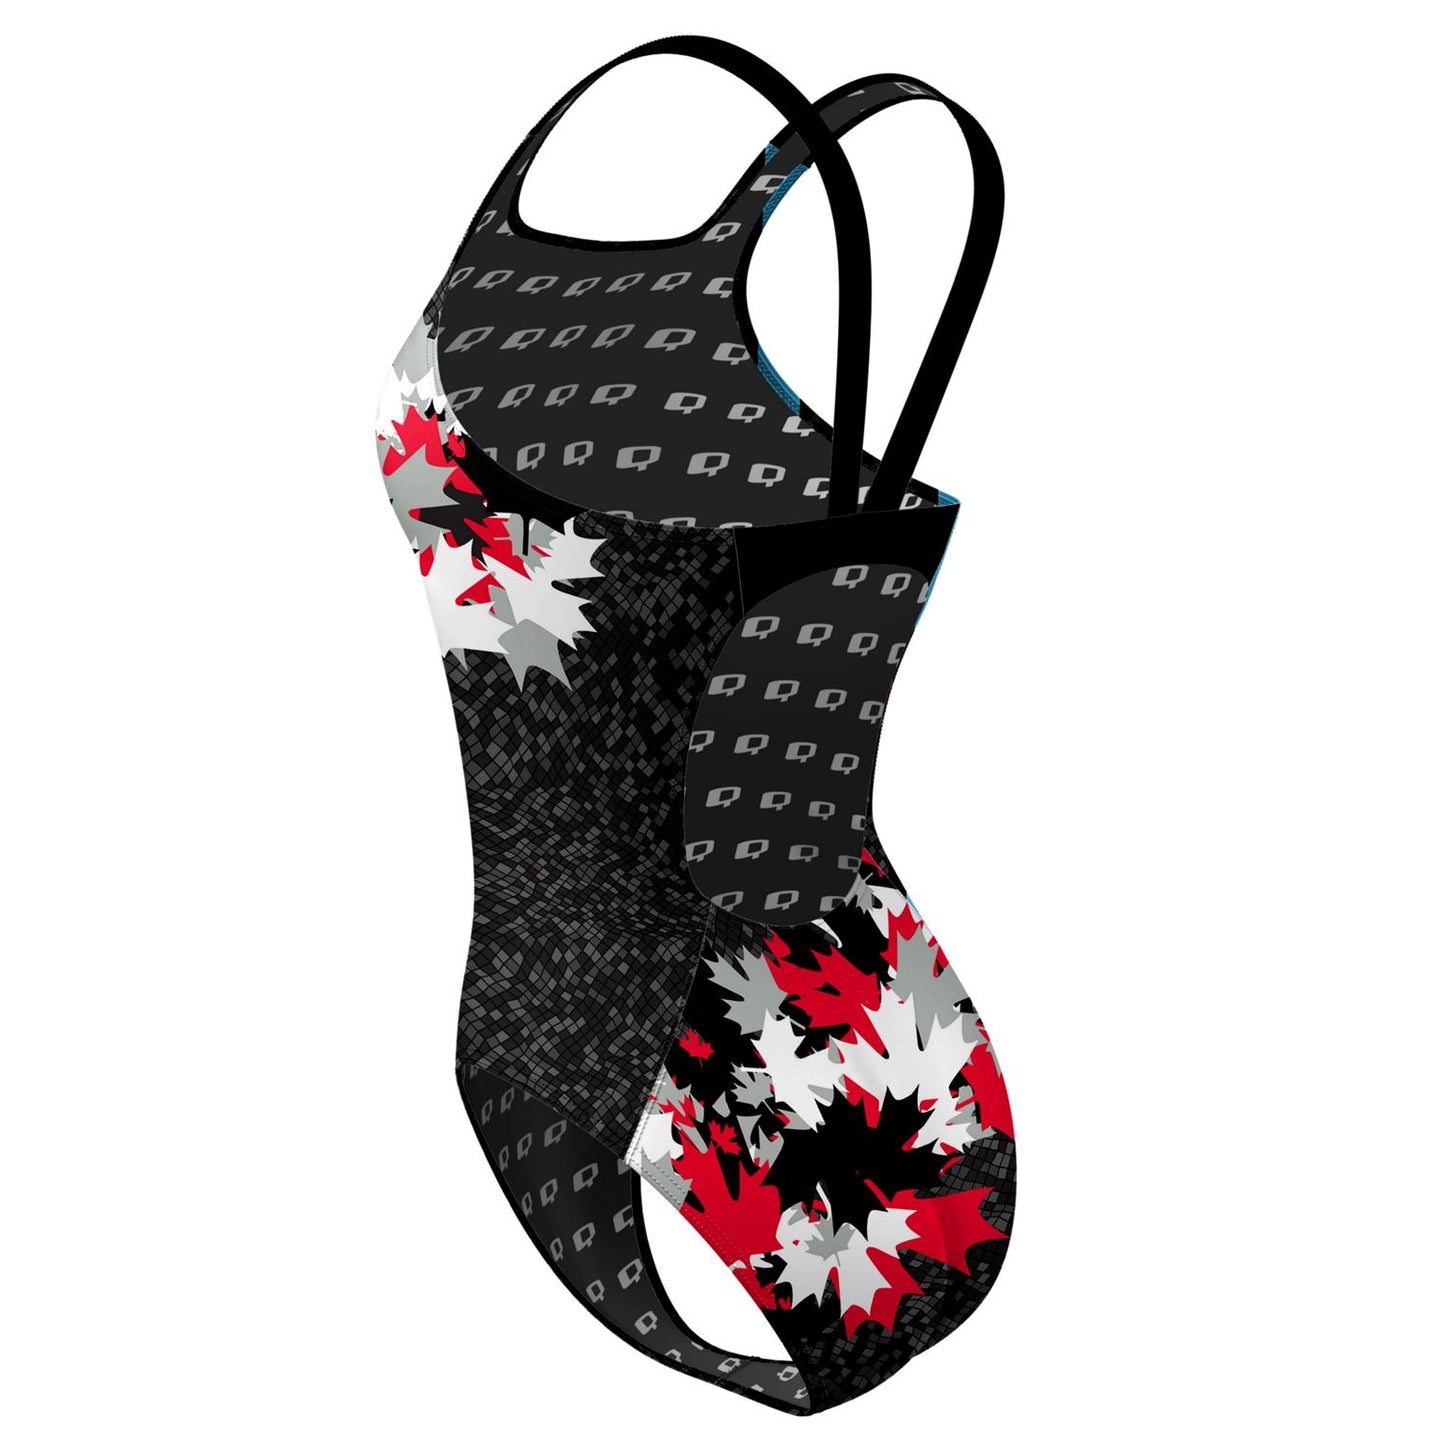 The Great Maple Classic Strap Swimsuit